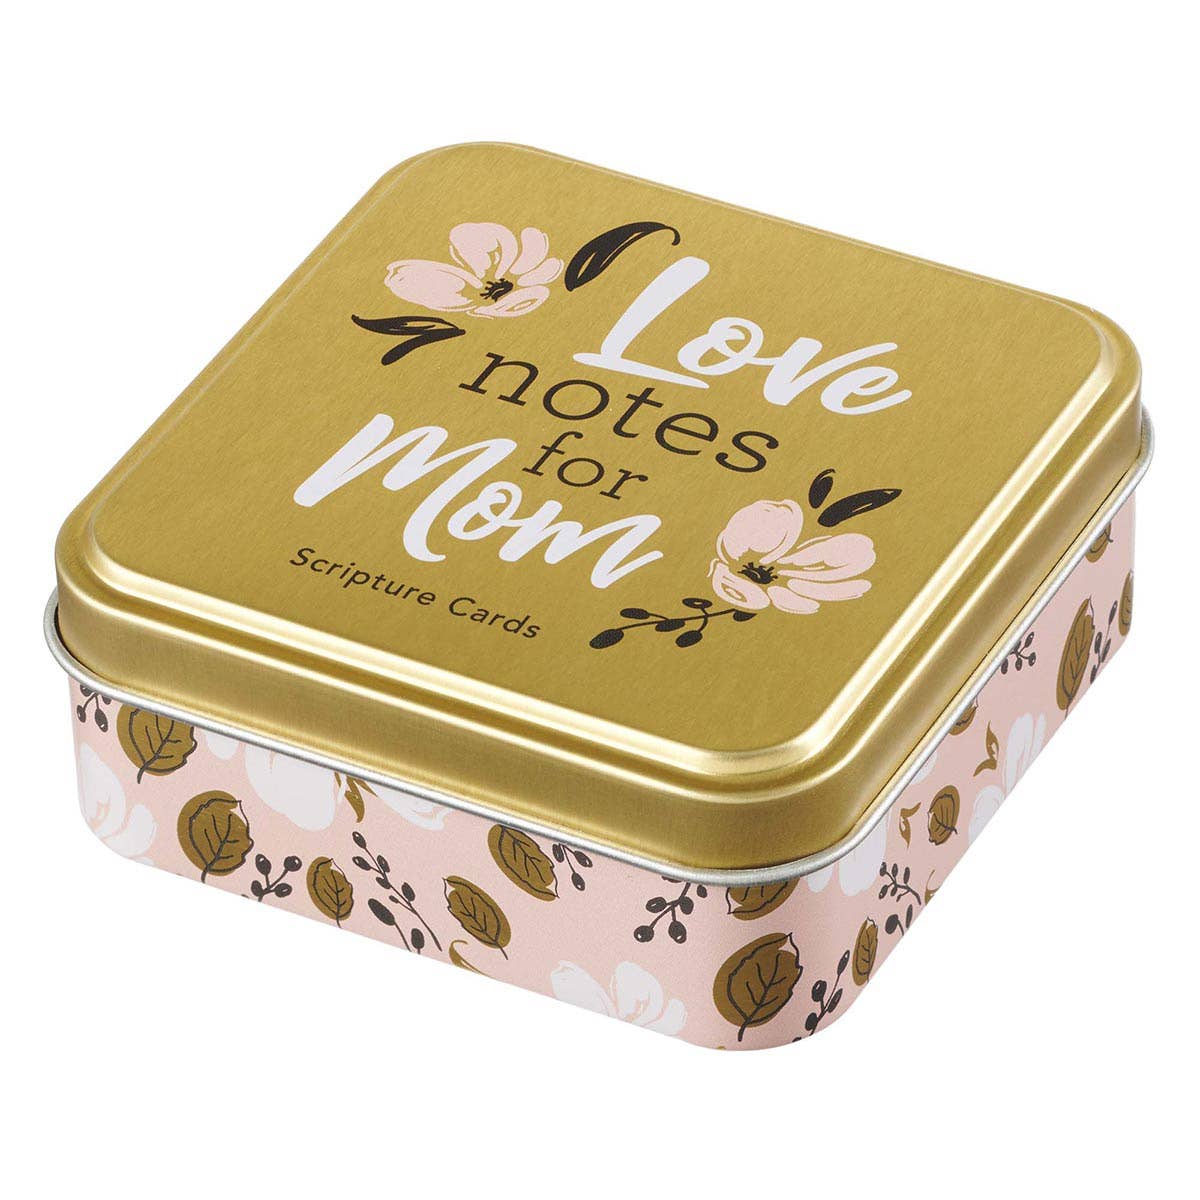 Love Notes for Mom Scripture Cards in a Tin